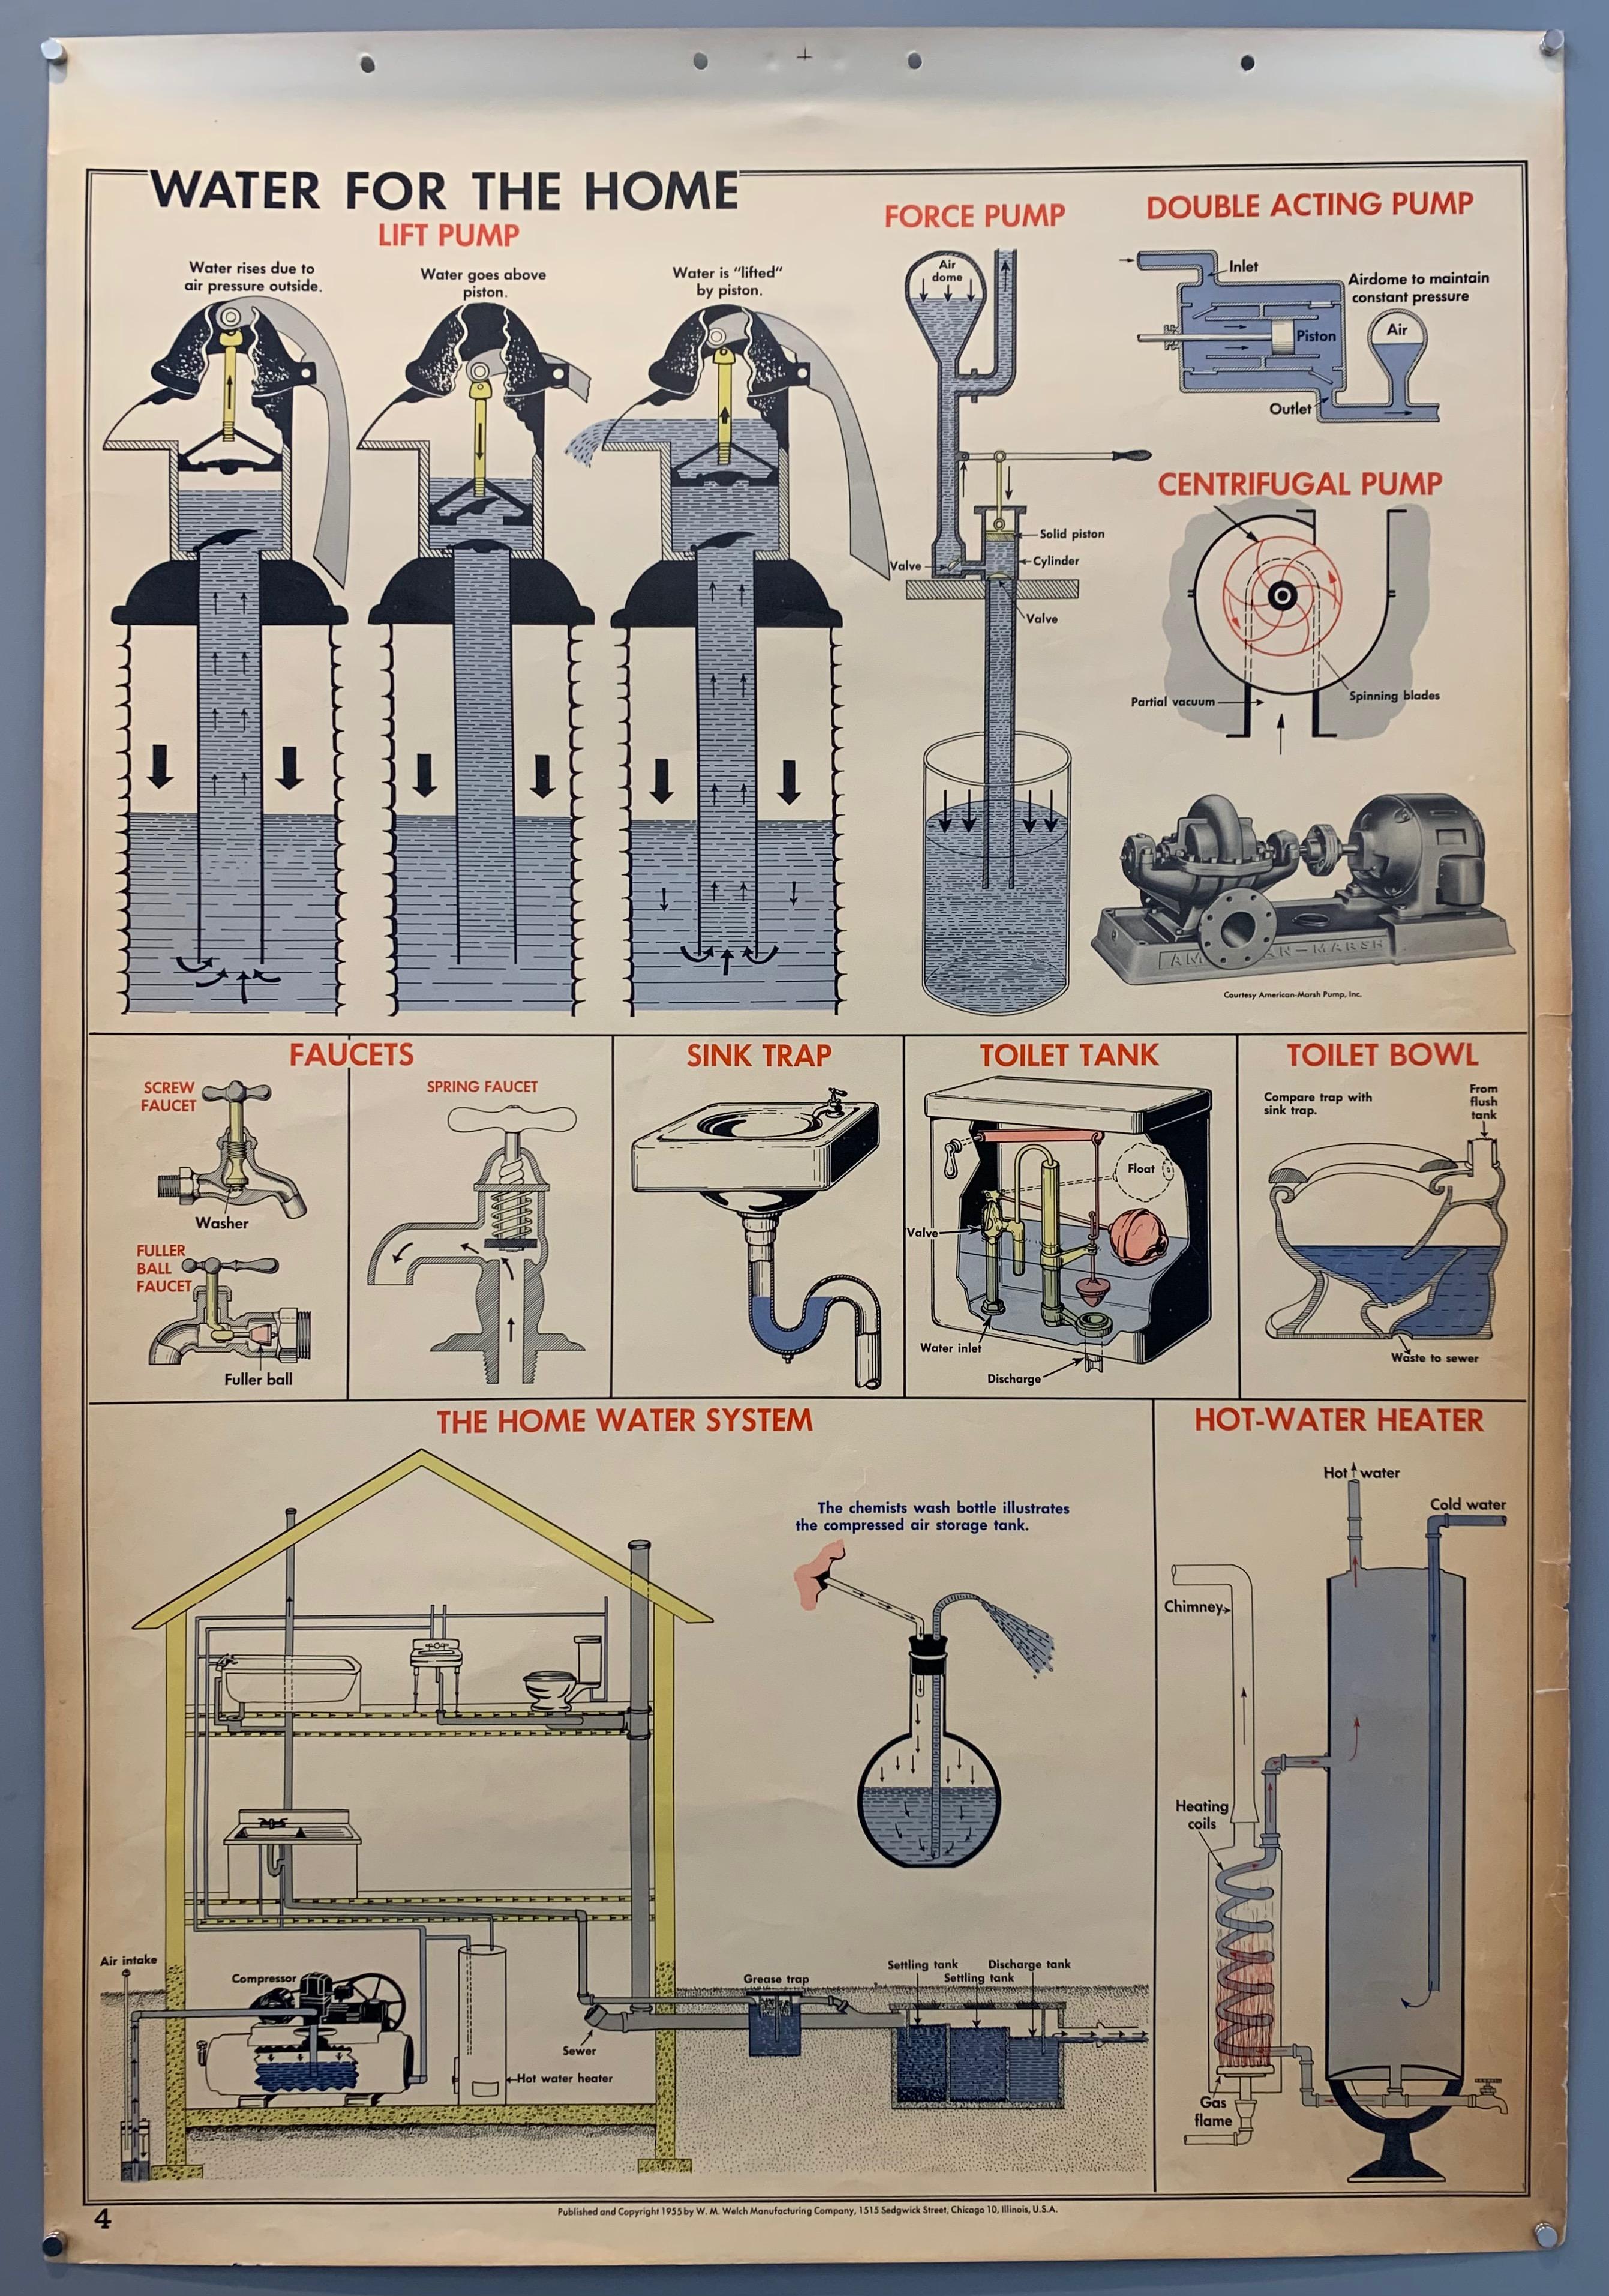 School Wall Chart: Water for the Home (a)